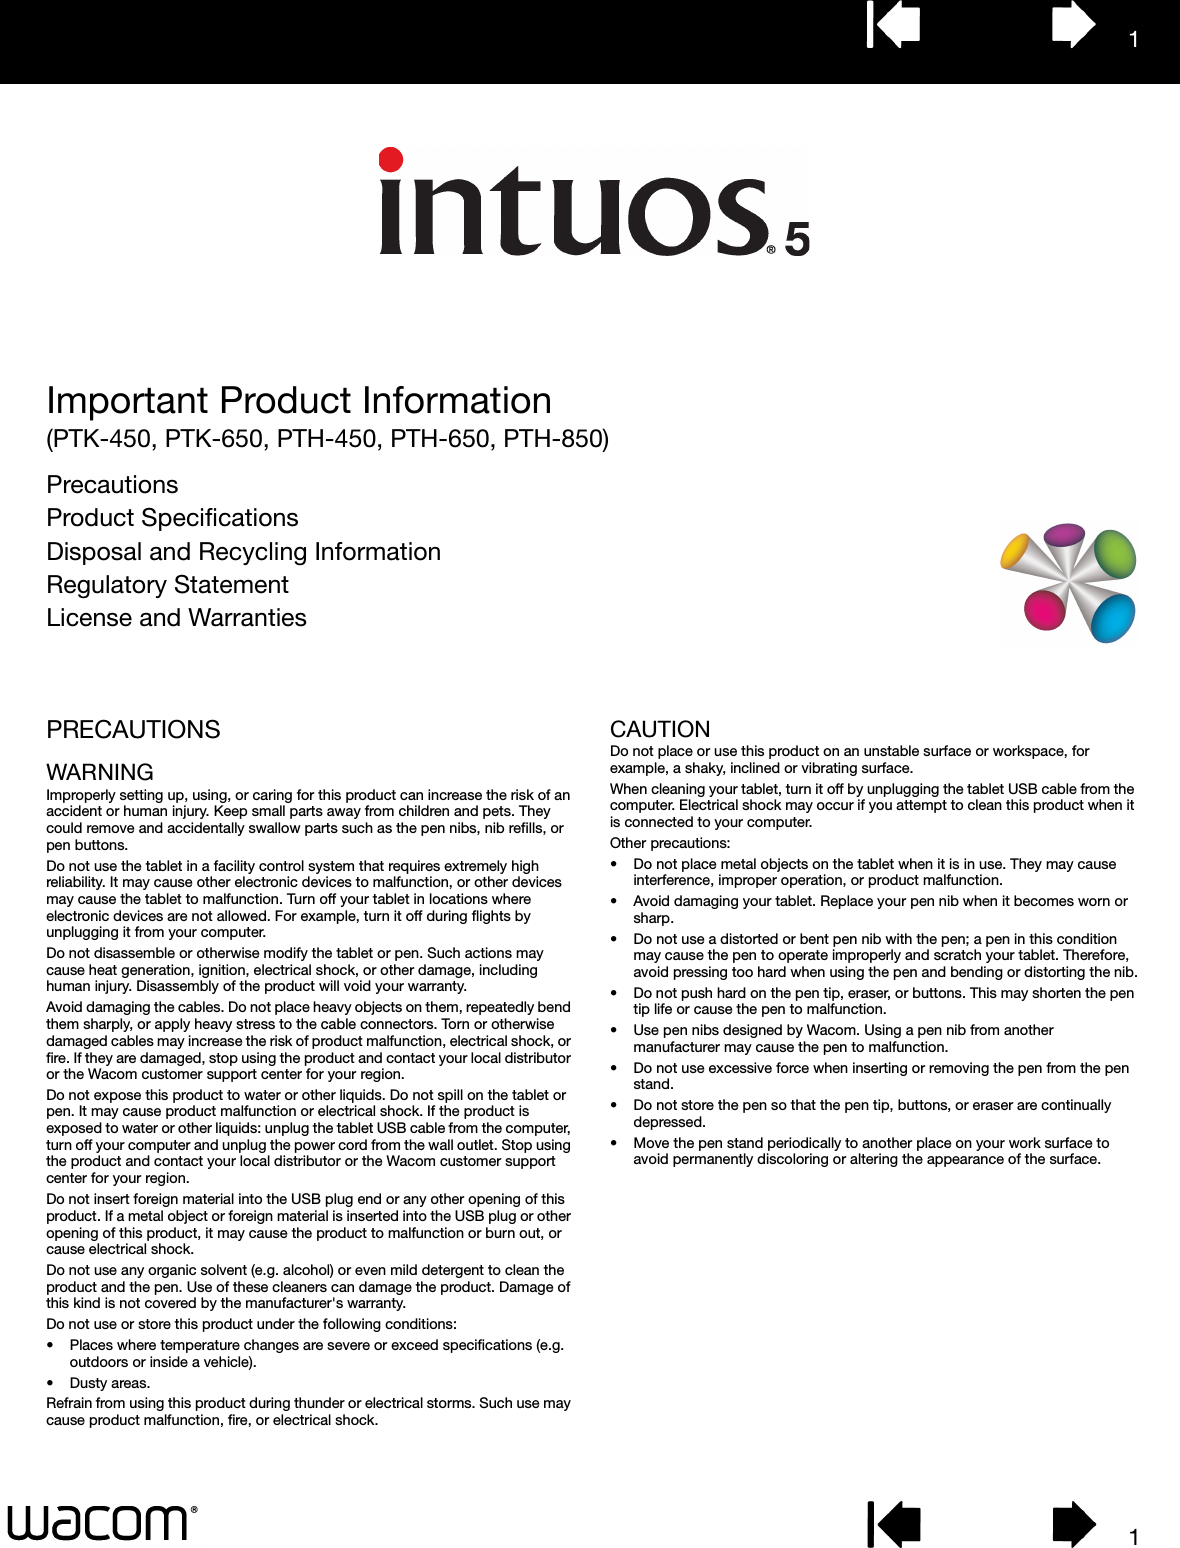 11Important Product Information(PTK-450, PTK-650, PTH-450, PTH-650, PTH-850)PrecautionsProduct SpecificationsDisposal and Recycling InformationRegulatory StatementLicense and WarrantiesPRECAUTIONSWARNINGImproperly setting up, using, or caring for this product can increase the risk of an accident or human injury. Keep small parts away from children and pets. They could remove and accidentally swallow parts such as the pen nibs, nib refills, or pen buttons. Do not use the tablet in a facility control system that requires extremely high reliability. It may cause other electronic devices to malfunction, or other devices may cause the tablet to malfunction. Turn off your tablet in locations where electronic devices are not allowed. For example, turn it off during flights by unplugging it from your computer.Do not disassemble or otherwise modify the tablet or pen. Such actions may cause heat generation, ignition, electrical shock, or other damage, including human injury. Disassembly of the product will void your warranty.Avoid damaging the cables. Do not place heavy objects on them, repeatedly bend them sharply, or apply heavy stress to the cable connectors. Torn or otherwise damaged cables may increase the risk of product malfunction, electrical shock, or fire. If they are damaged, stop using the product and contact your local distributor or the Wacom customer support center for your region.Do not expose this product to water or other liquids. Do not spill on the tablet or pen. It may cause product malfunction or electrical shock. If the product is exposed to water or other liquids: unplug the tablet USB cable from the computer, turn off your computer and unplug the power cord from the wall outlet. Stop using the product and contact your local distributor or the Wacom customer support center for your region. Do not insert foreign material into the USB plug end or any other opening of this product. If a metal object or foreign material is inserted into the USB plug or other opening of this product, it may cause the product to malfunction or burn out, or cause electrical shock.Do not use any organic solvent (e.g. alcohol) or even mild detergent to clean the product and the pen. Use of these cleaners can damage the product. Damage of this kind is not covered by the manufacturer&apos;s warranty.Do not use or store this product under the following conditions:• Places where temperature changes are severe or exceed specifications (e.g. outdoors or inside a vehicle).•Dusty areas.Refrain from using this product during thunder or electrical storms. Such use may cause product malfunction, fire, or electrical shock.CAUTIONDo not place or use this product on an unstable surface or workspace, for example, a shaky, inclined or vibrating surface.When cleaning your tablet, turn it off by unplugging the tablet USB cable from the computer. Electrical shock may occur if you attempt to clean this product when it is connected to your computer.Other precautions:• Do not place metal objects on the tablet when it is in use. They may cause interference, improper operation, or product malfunction.• Avoid damaging your tablet. Replace your pen nib when it becomes worn or sharp.• Do not use a distorted or bent pen nib with the pen; a pen in this condition may cause the pen to operate improperly and scratch your tablet. Therefore, avoid pressing too hard when using the pen and bending or distorting the nib.• Do not push hard on the pen tip, eraser, or buttons. This may shorten the pen tip life or cause the pen to malfunction.• Use pen nibs designed by Wacom. Using a pen nib from another manufacturer may cause the pen to malfunction.• Do not use excessive force when inserting or removing the pen from the pen stand.• Do not store the pen so that the pen tip, buttons, or eraser are continually depressed.• Move the pen stand periodically to another place on your work surface to avoid permanently discoloring or altering the appearance of the surface.